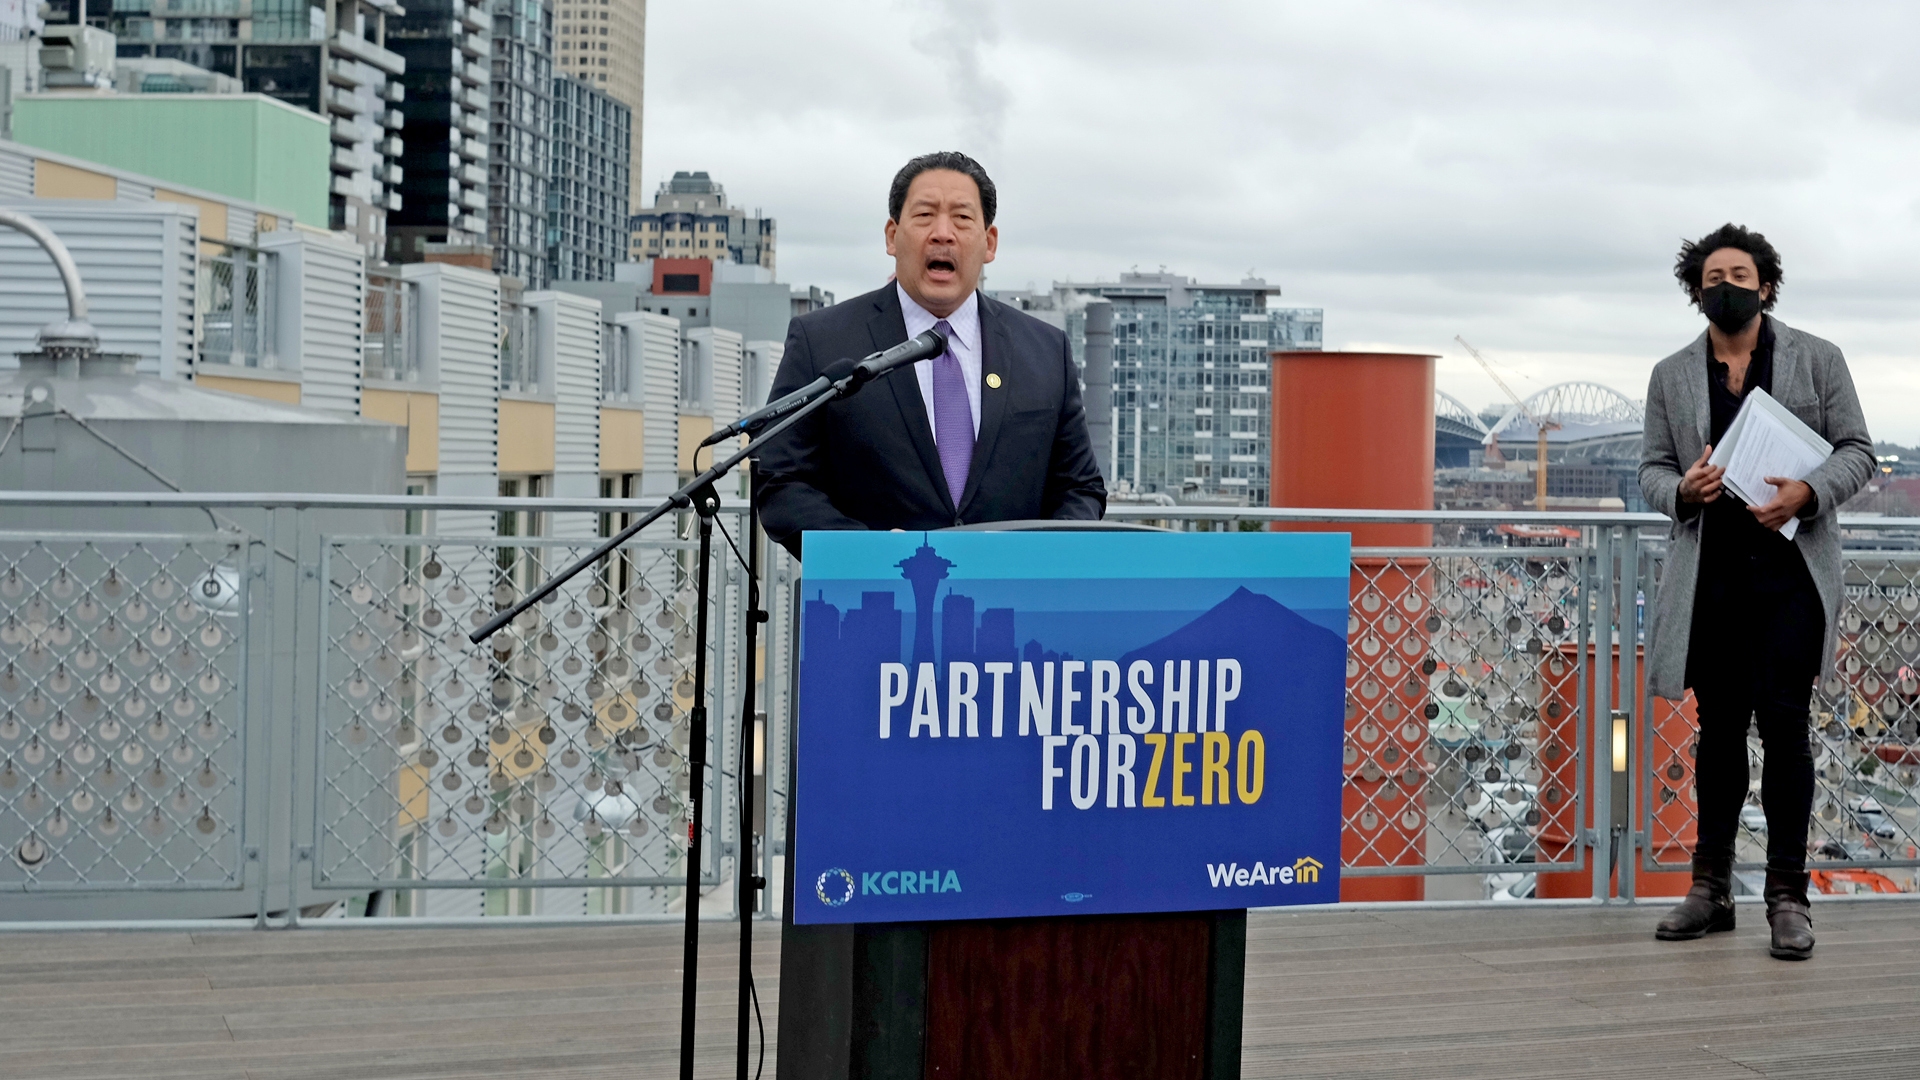 The Mayor of Seattle, Bruce Harrell, speaks into a microphone as he stands behind a podium with a sign that reads, "Partnership for Zero."